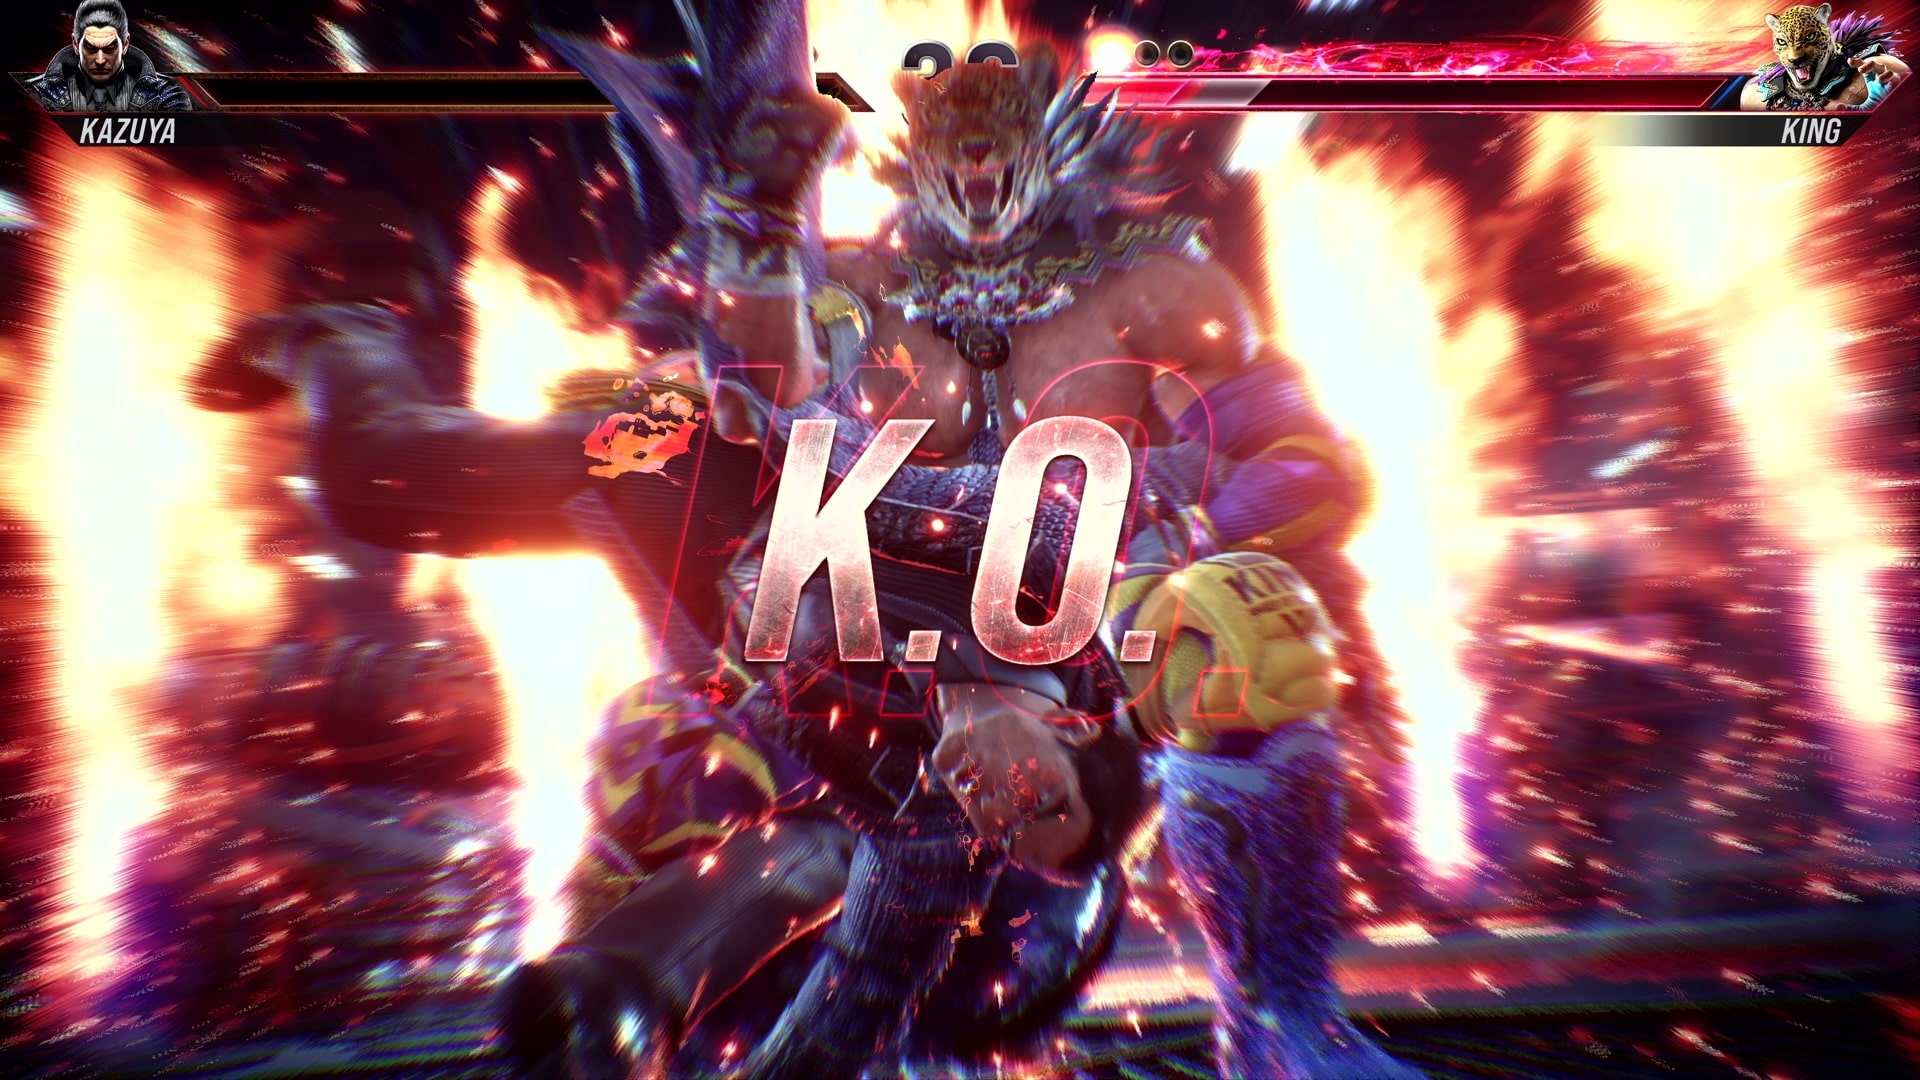 Tekken 8' Gets A Very Shiny Teaser Trailer Showing Off New Gameplay But No Release  Date